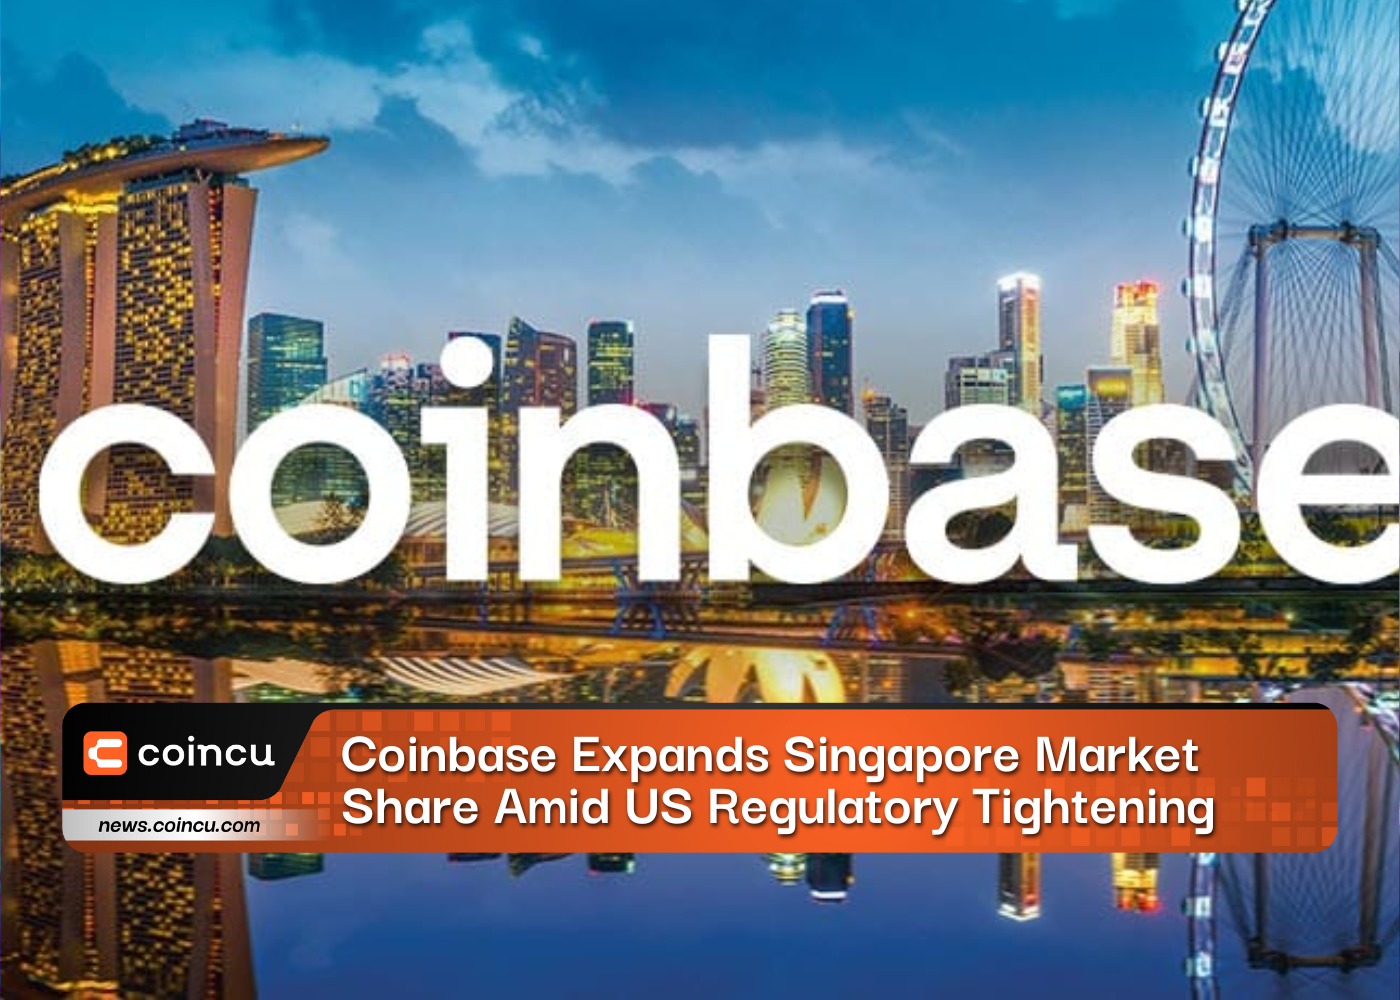 Coinbase Expands Singapore Market Share Amid US Regulatory Tightening